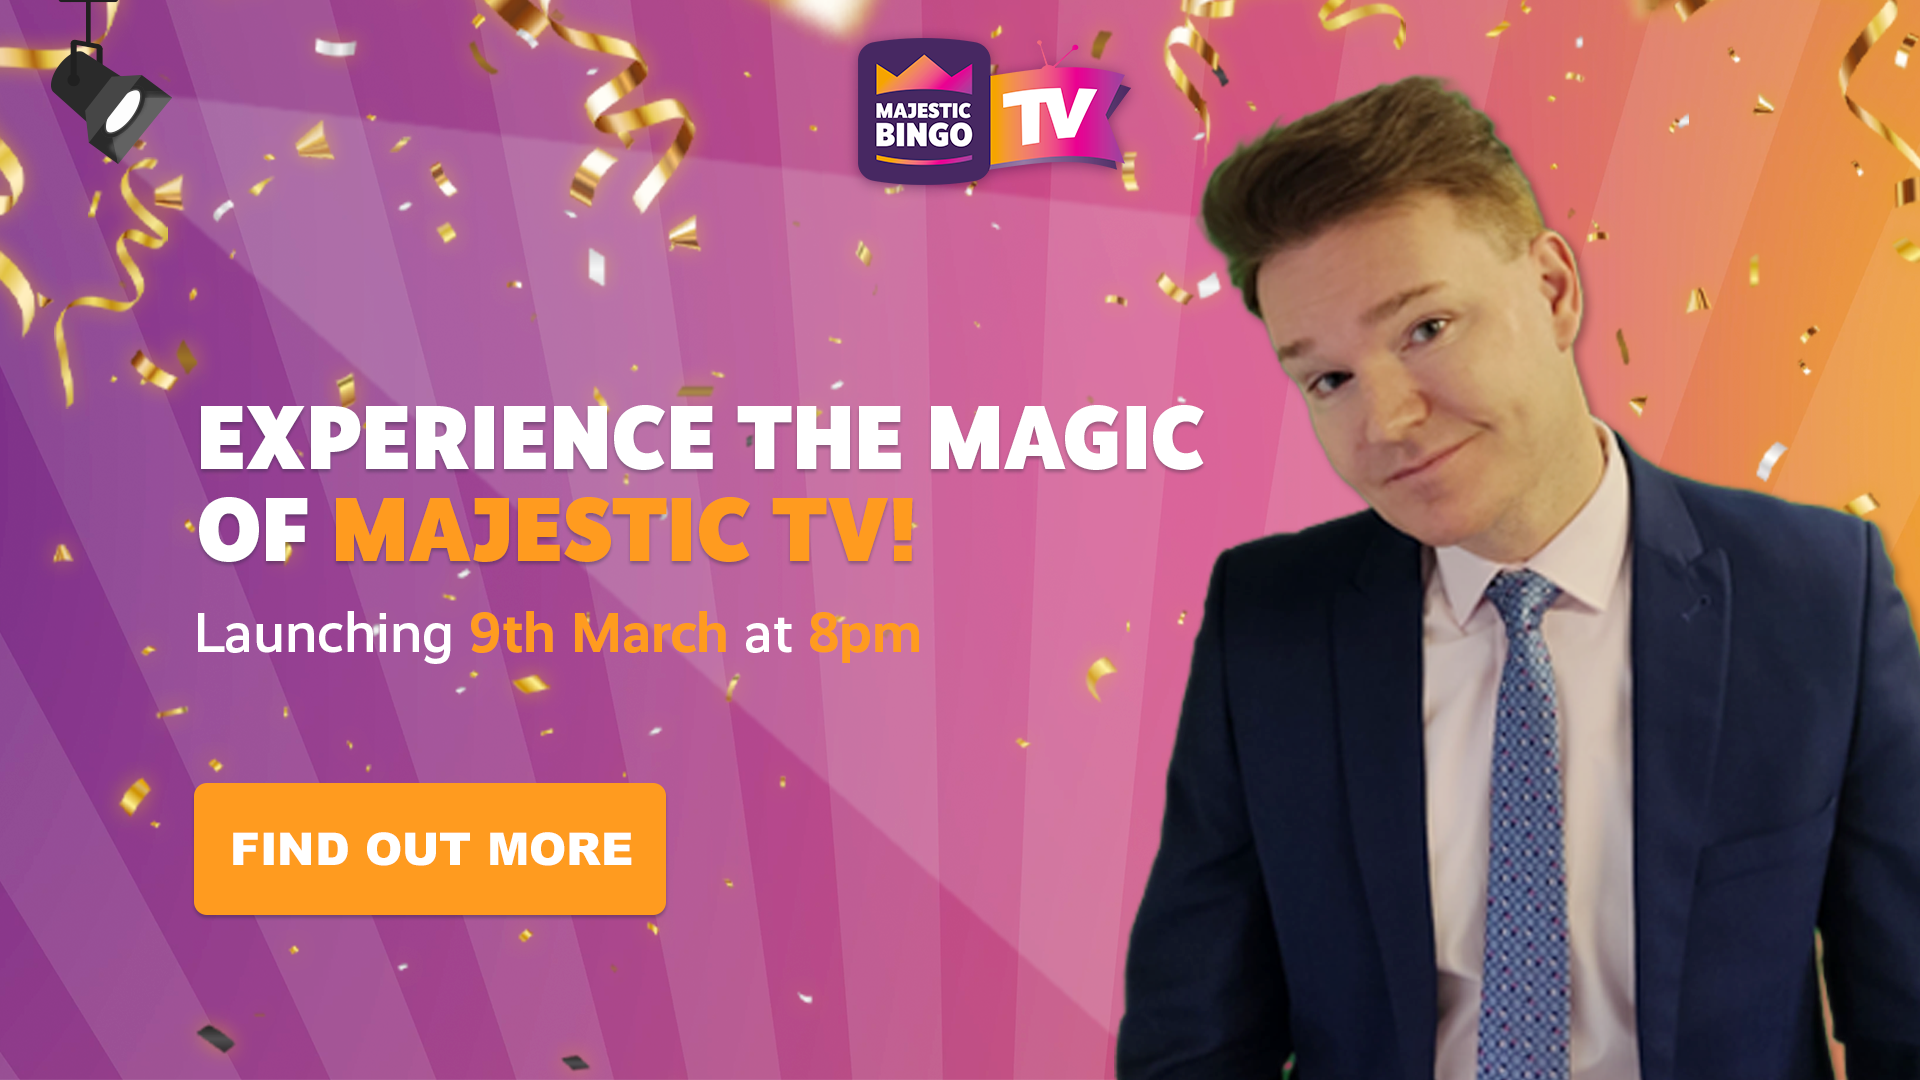 Get Ready for Majestic TV: The Ultimate Live Bingo Experience